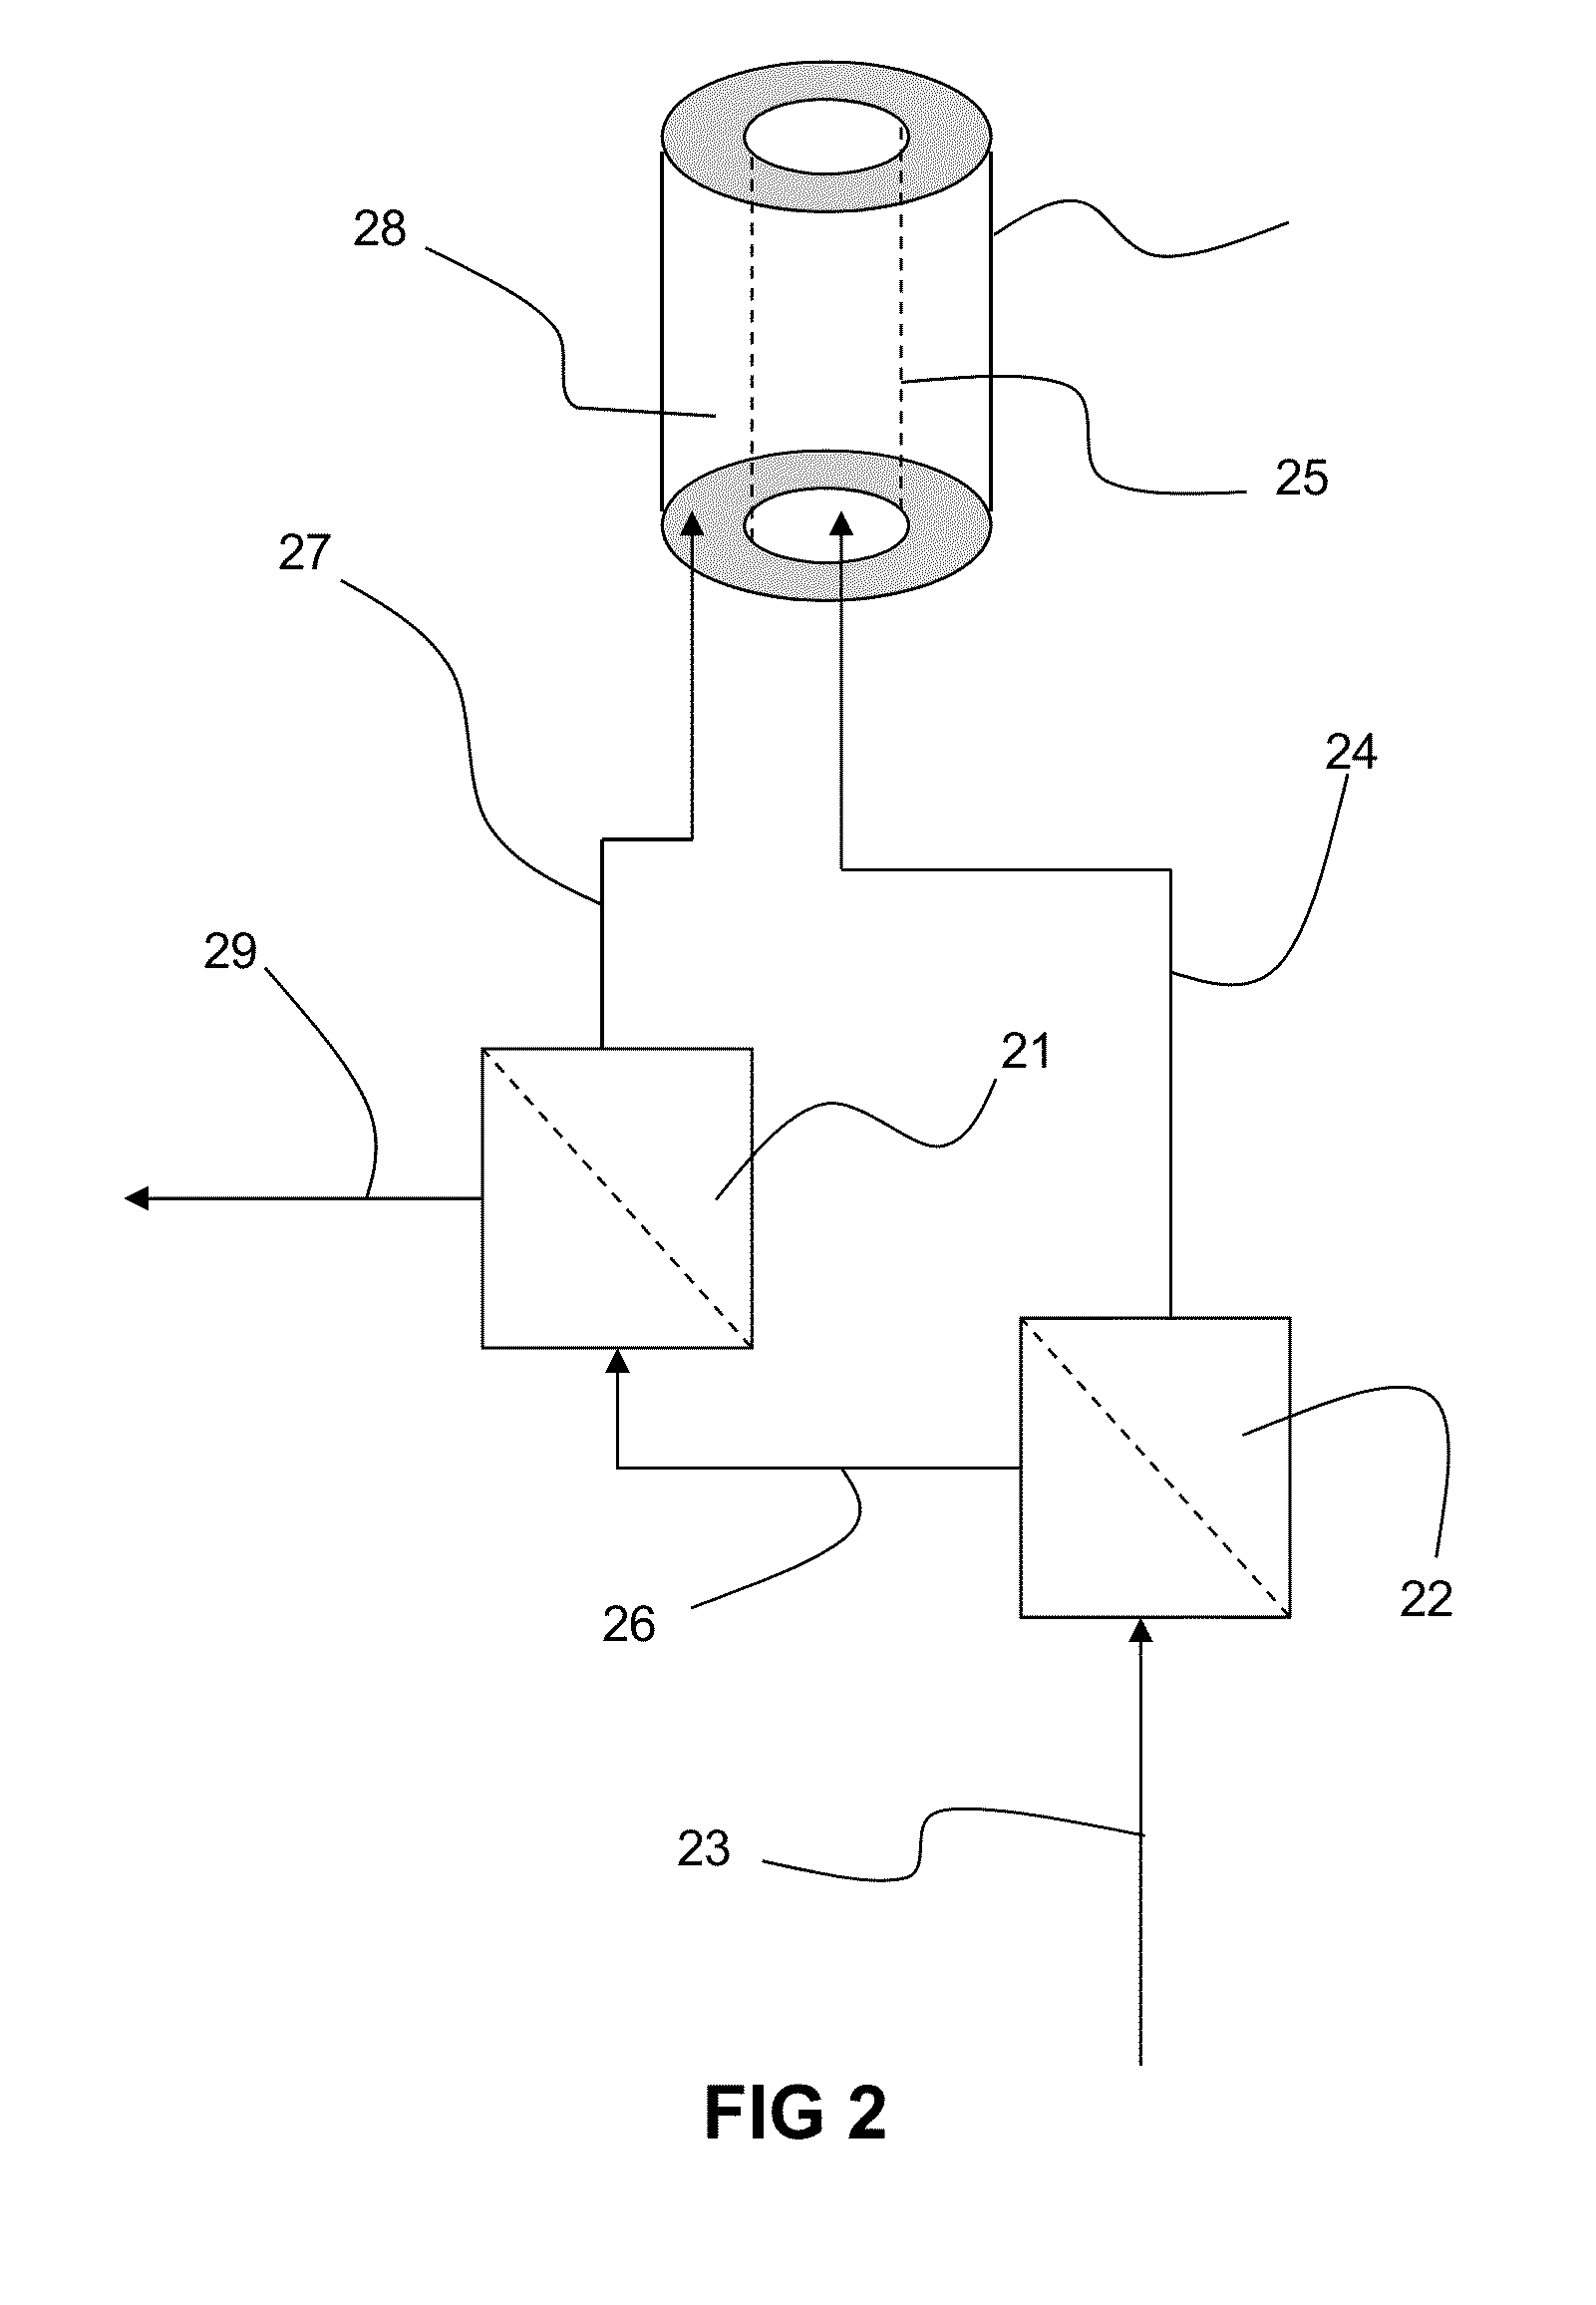 Method and System for Injecting Low Pressure Oxygen from an Ion Transport Membrane into an Ambient or Super Ambient Pressure Oxygen-Consuming Process